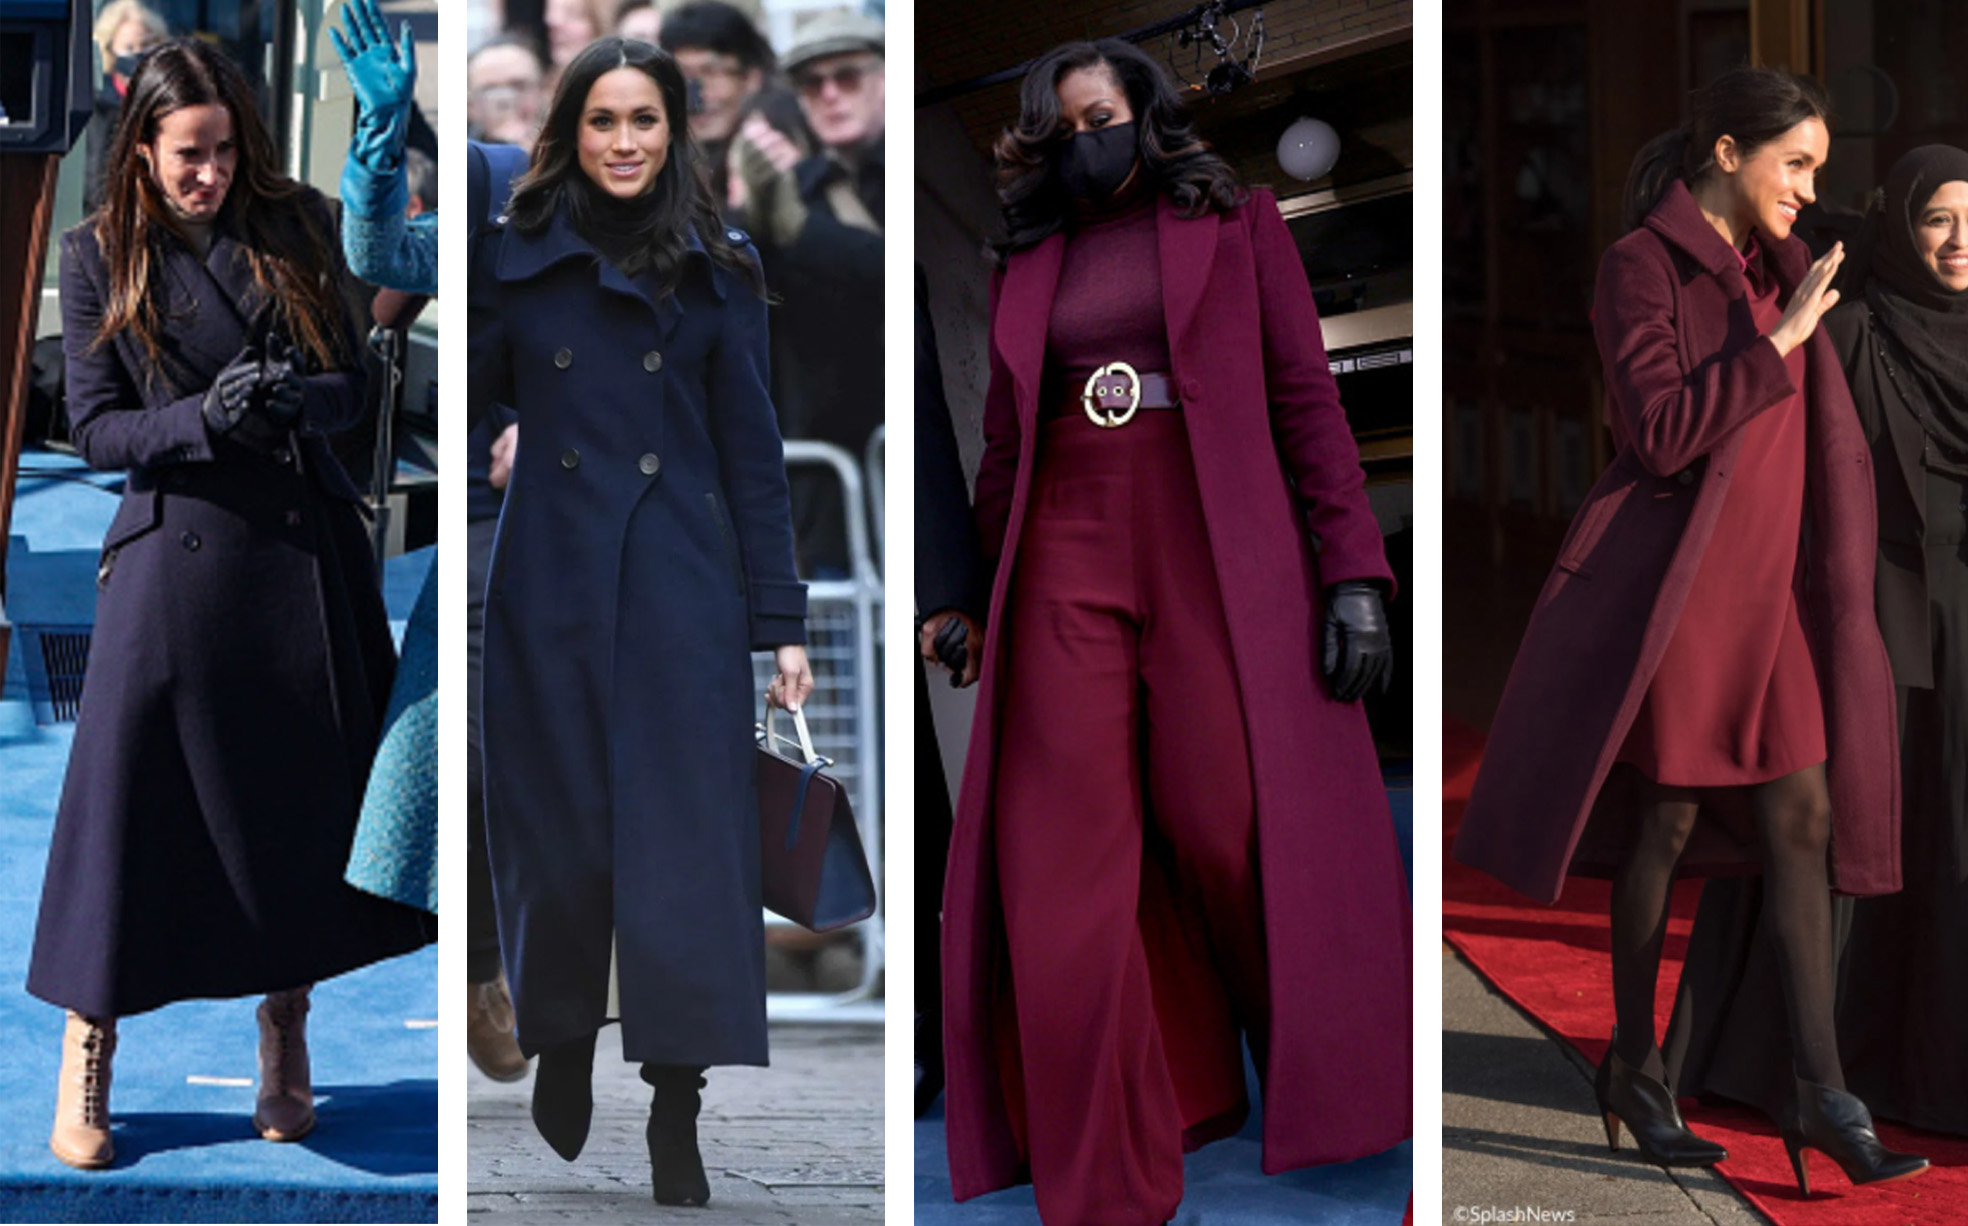 Duchess of Sussex Style Beautifully Reflected on Inauguration Day